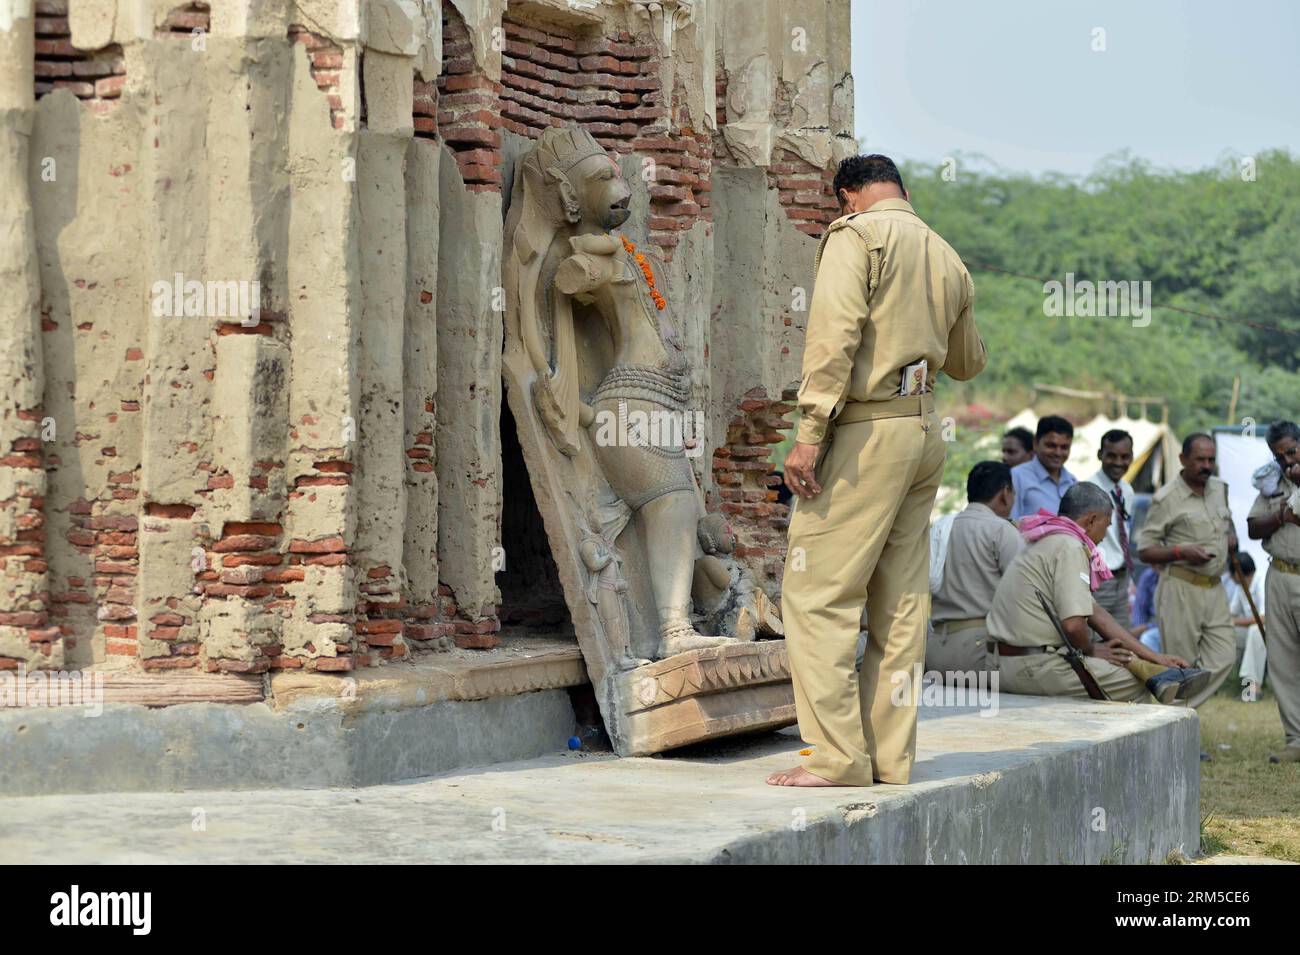 Bildnummer: 60623689  Datum: 21.10.2013  Copyright: imago/Xinhua Policemen work at the Raja Rao Ram Bux Singh s fort in Uttar Pradesh s Unnao district, India, Oct. 21, 2013. After a priest said he saw 1,000 tons of gold buried beneath a fort in Uttar Pradesh s Unnao district of northern India, a frenzy gold rush started in the area with hundreds of thousands of thronging to the spots hoping to become rich overnight. (Xinhua) INDIA-UNNAO-GOLD RUSH PUBLICATIONxNOTxINxCHN Gesellschaft x2x xkg 2013 quer premiumd o0 Polizei     60623689 Date 21 10 2013 Copyright Imago XINHUA Policemen Work AT The R Stock Photo